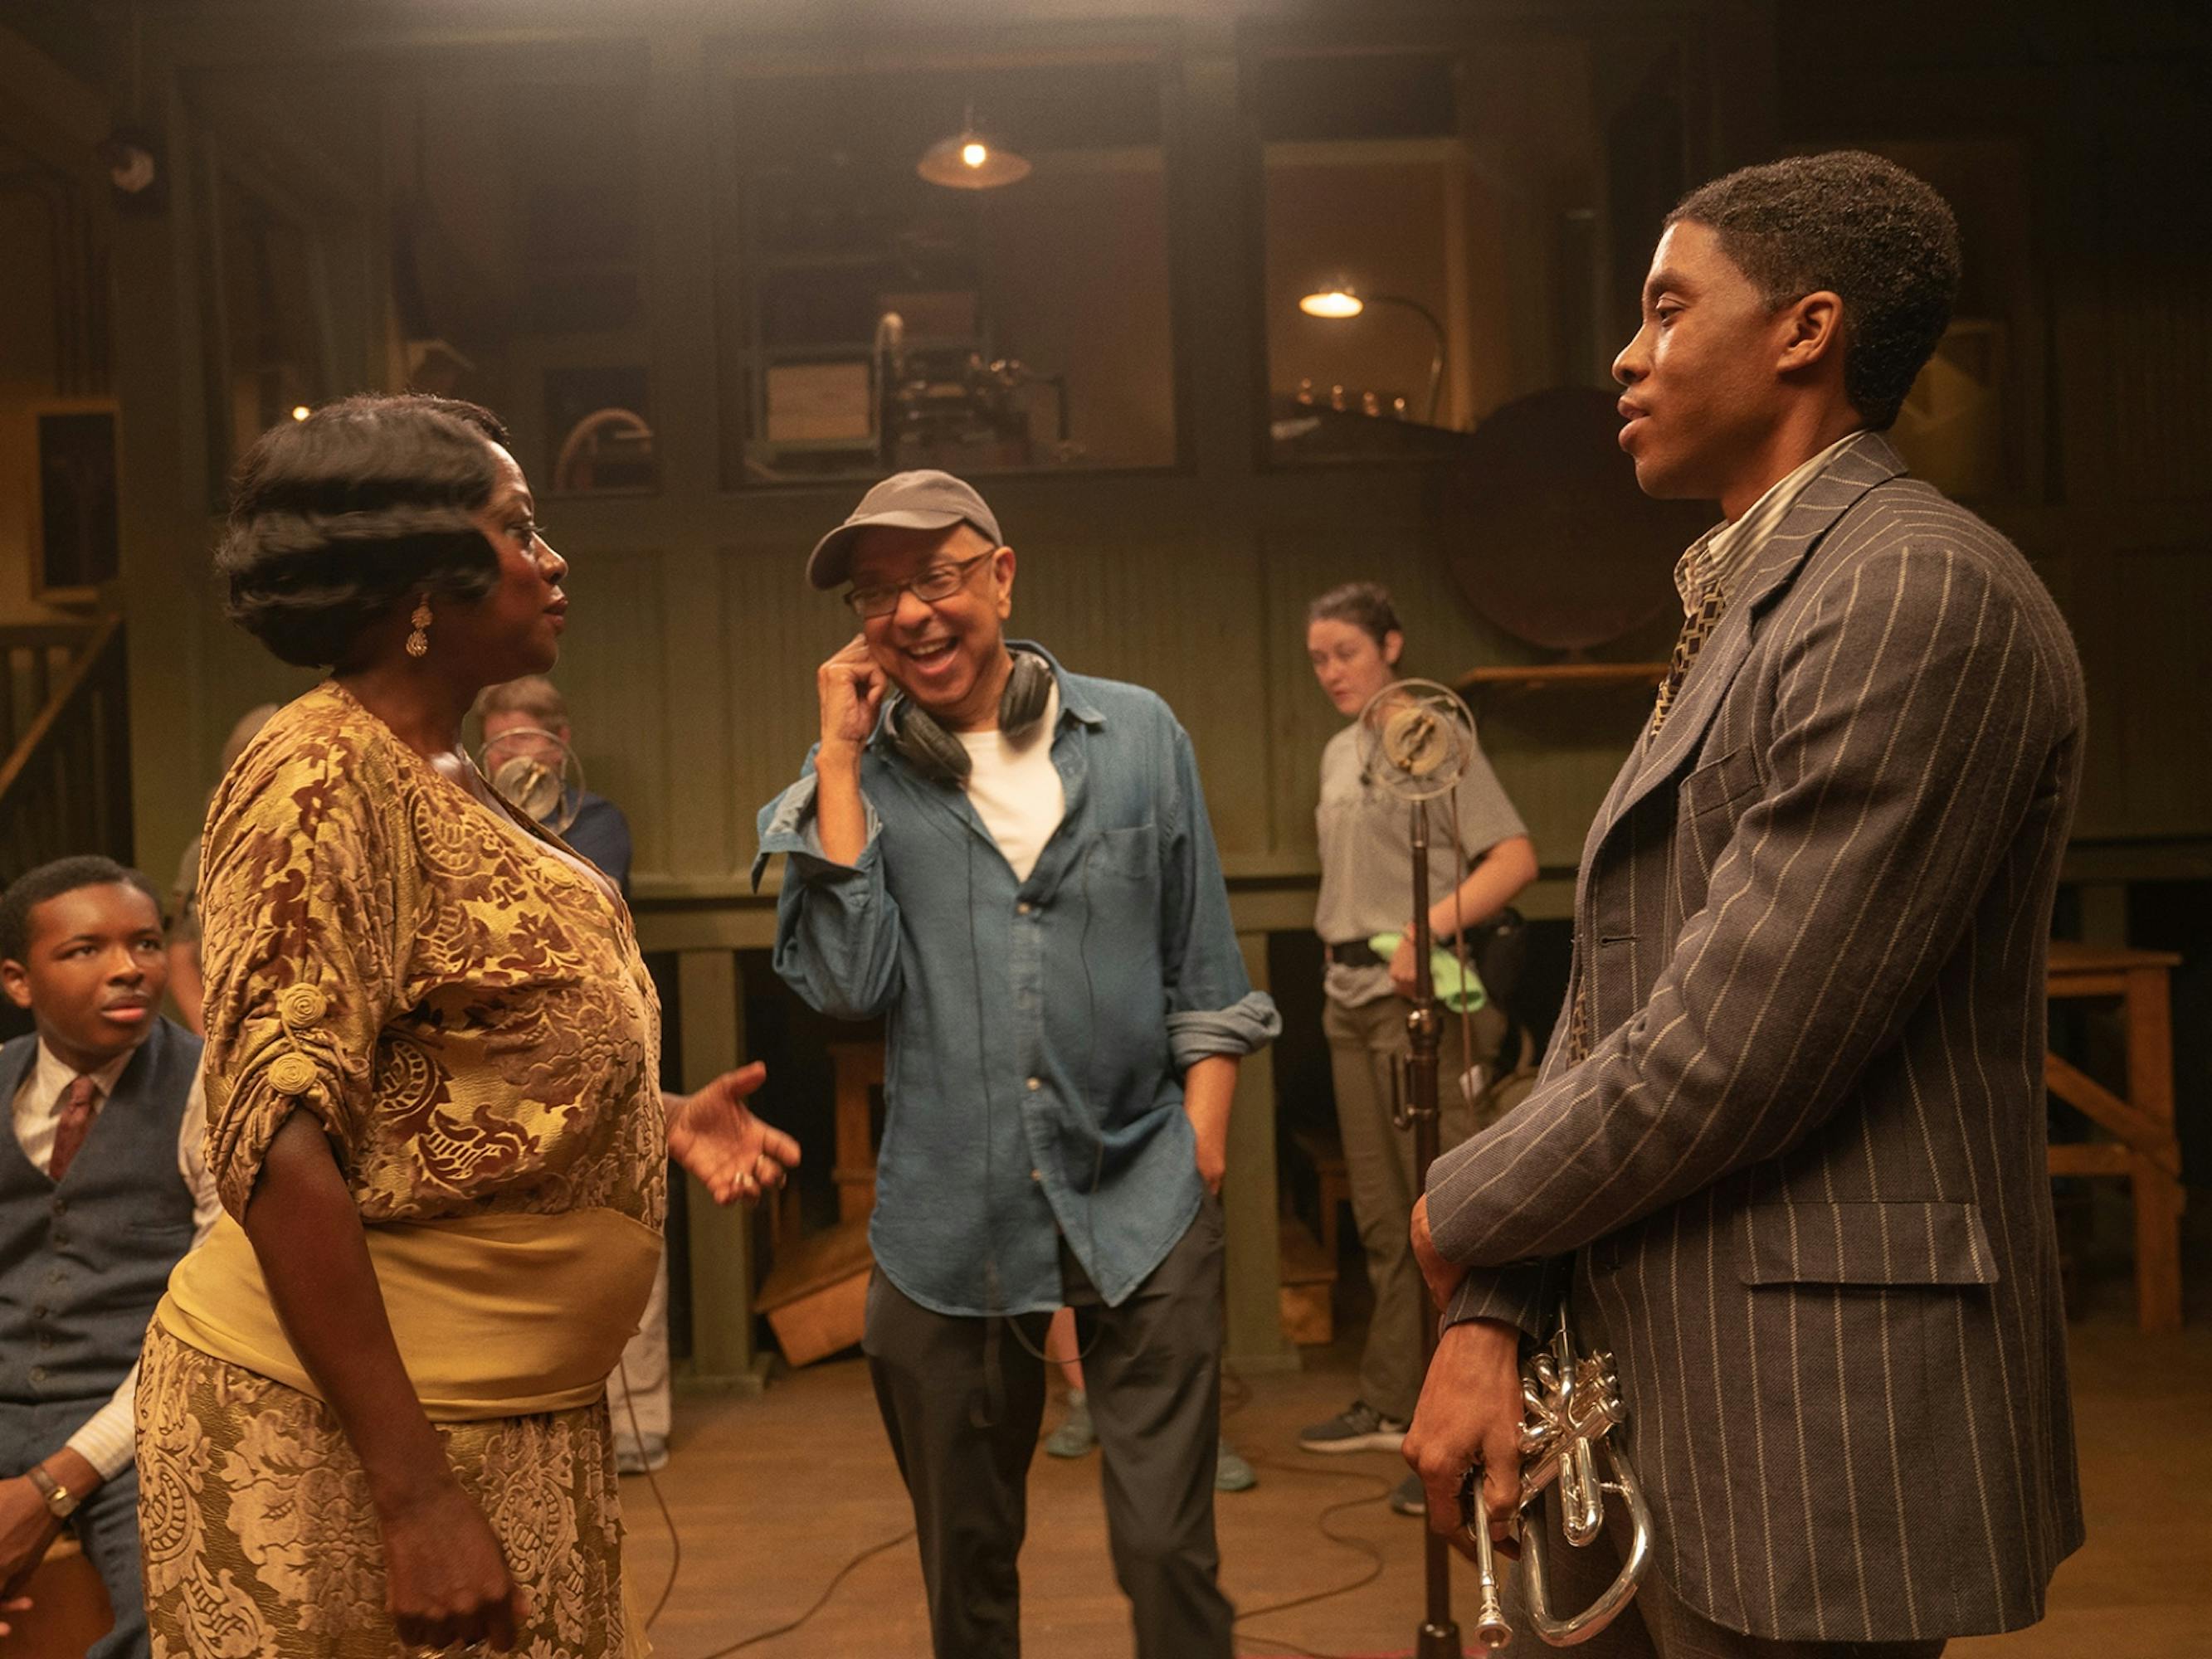 George C. Wolfe directs Viola Davis, looking glamorous in a drapey gold number, and Chadwick Boseman, dapper in pinstripes, in between takes of Ma Rainey’s Black Bottom.